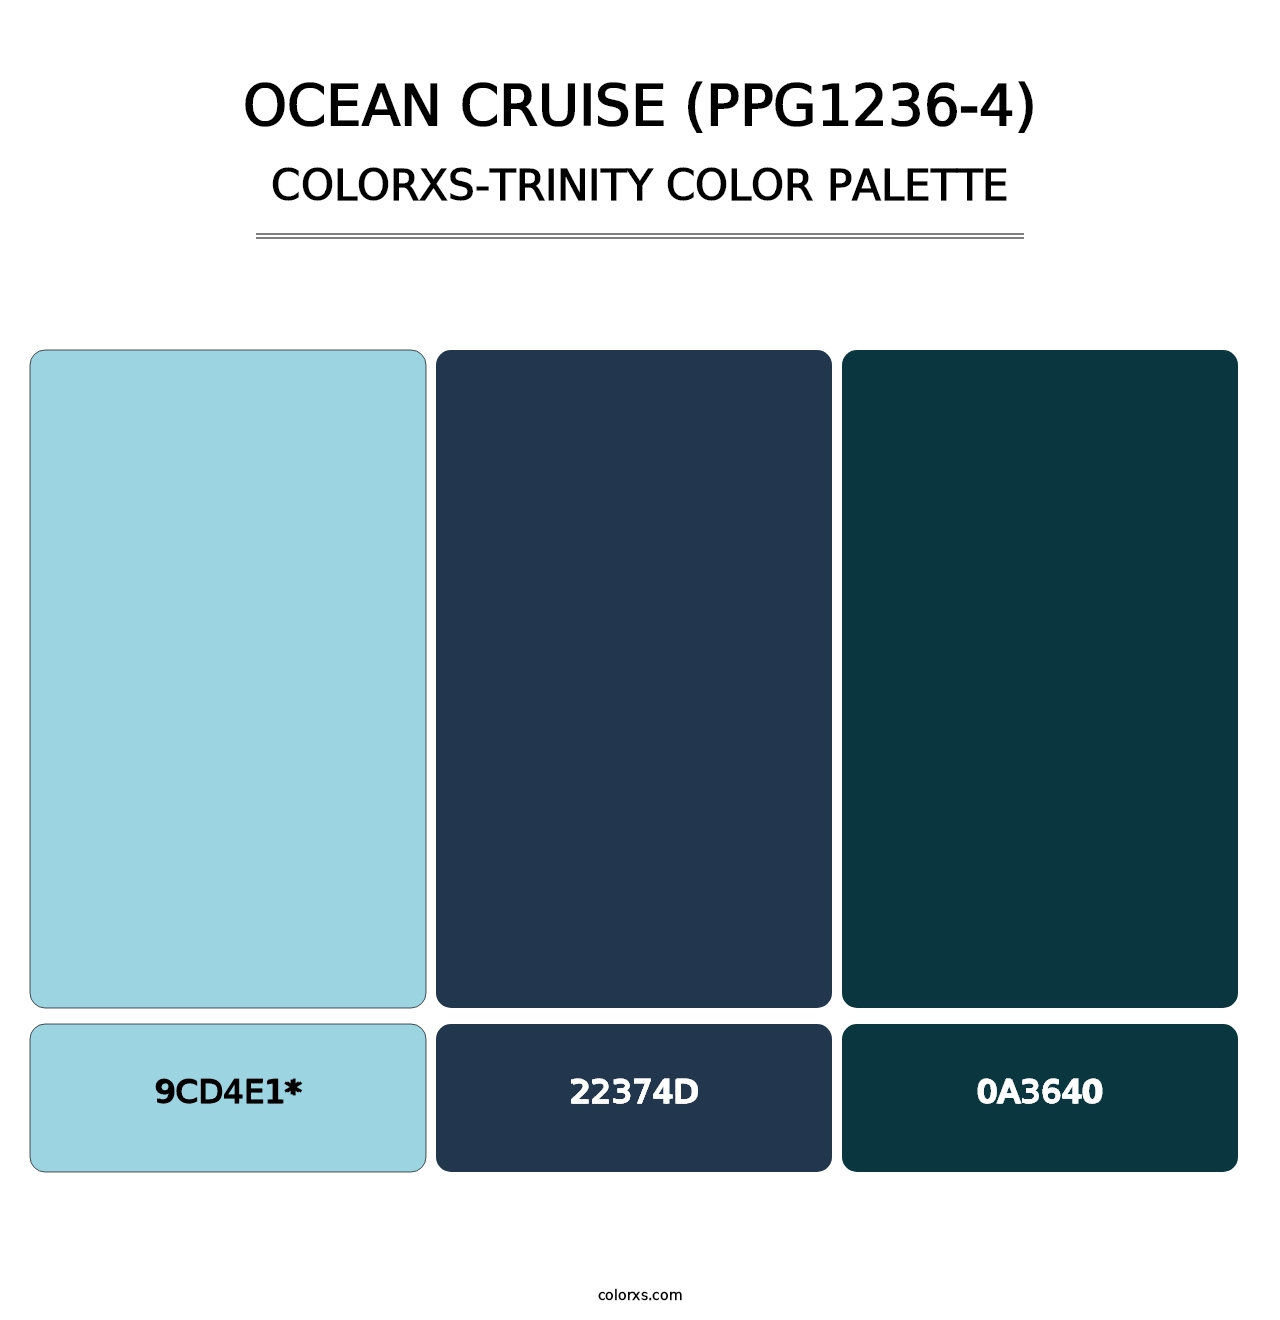 Ocean Cruise (PPG1236-4) - Colorxs Trinity Palette